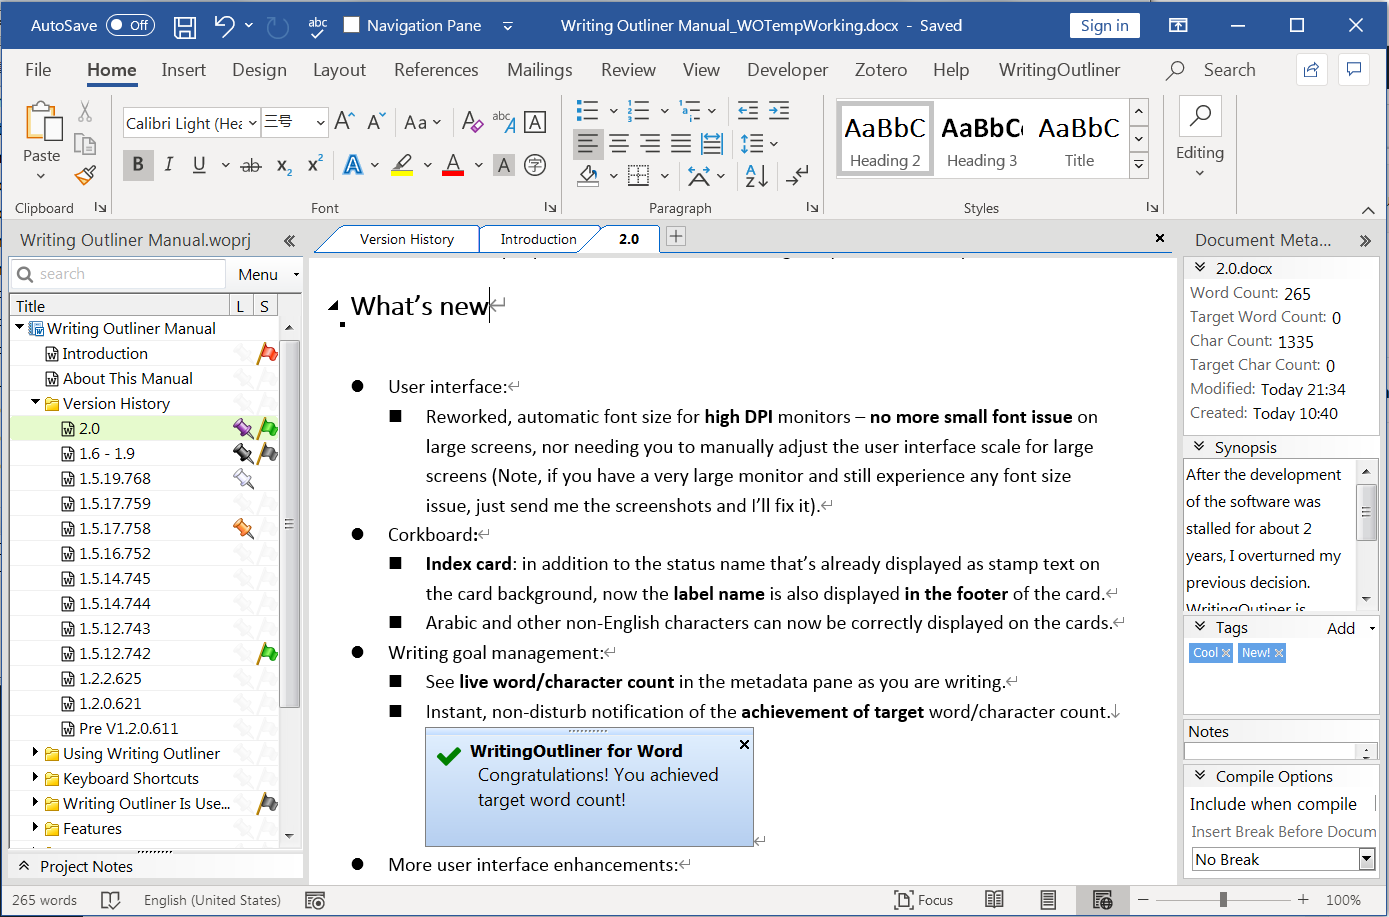 Writing Outliner for MS Word Screenshot